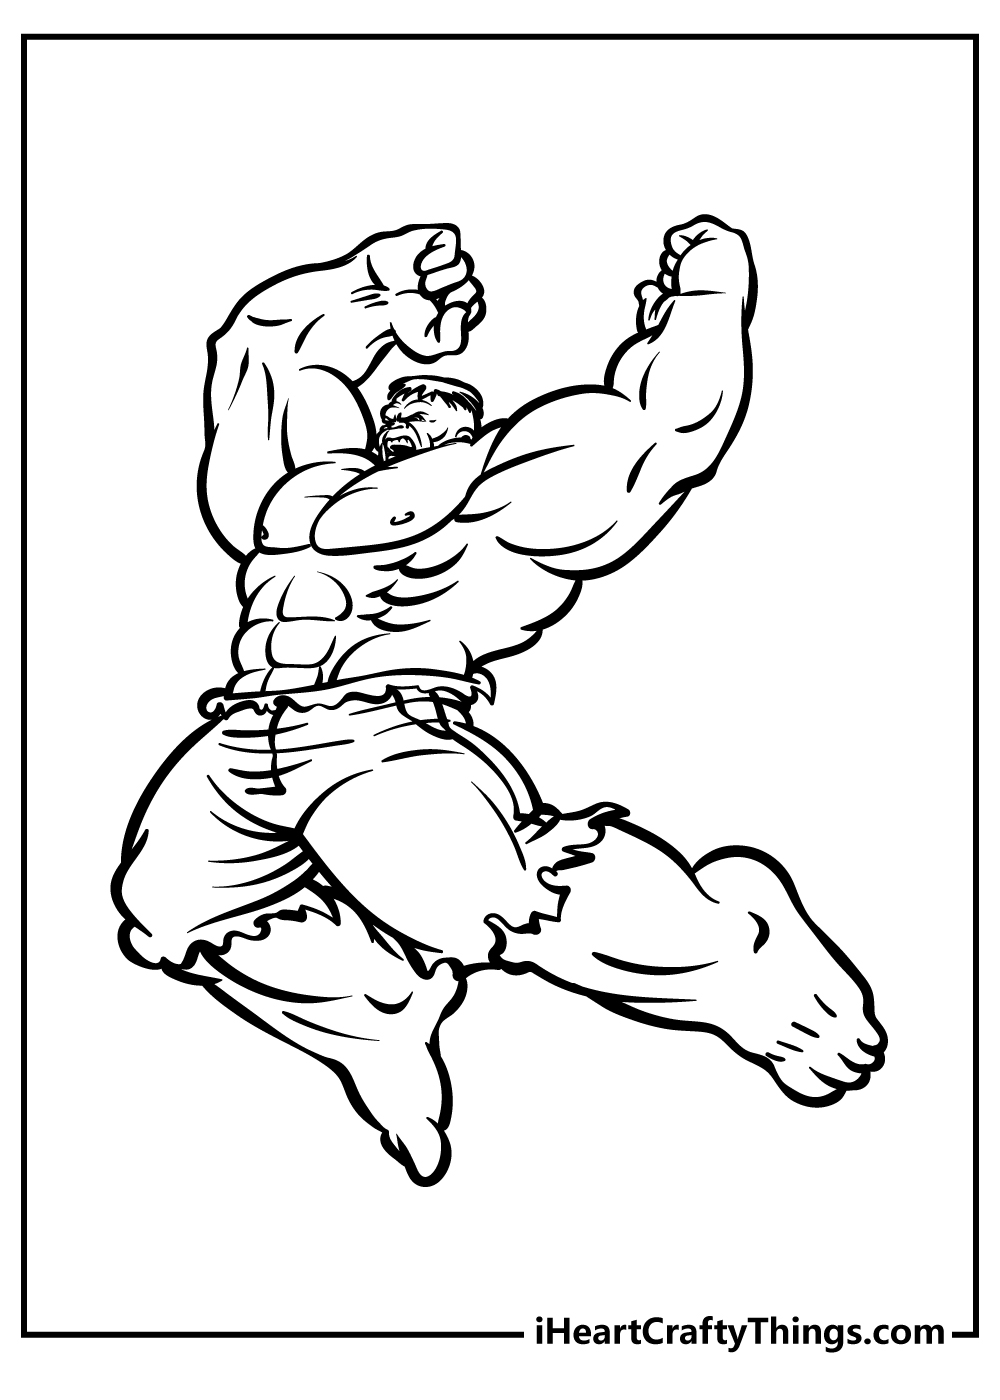 Superhero coloring pages free printable